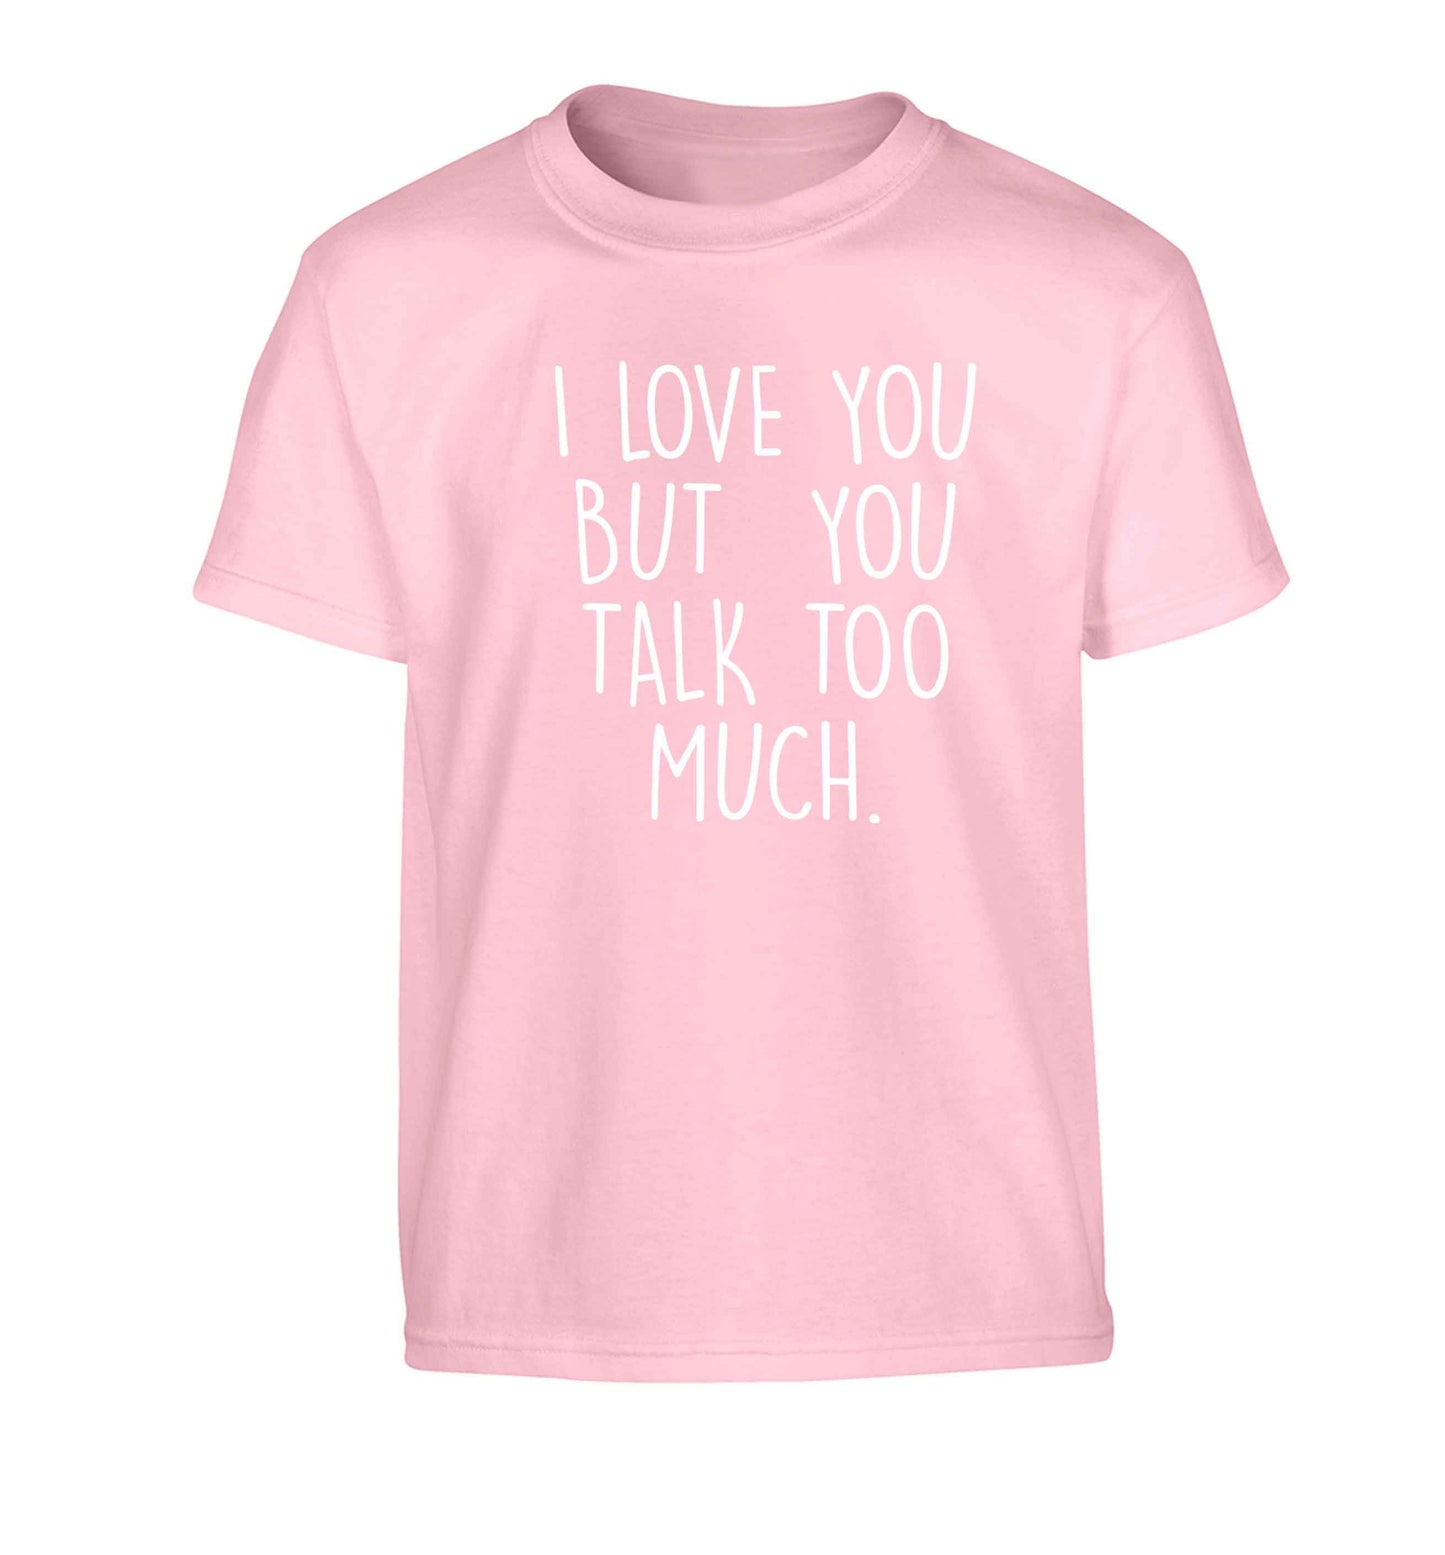 I love you but you talk too much Children's light pink Tshirt 12-13 Years